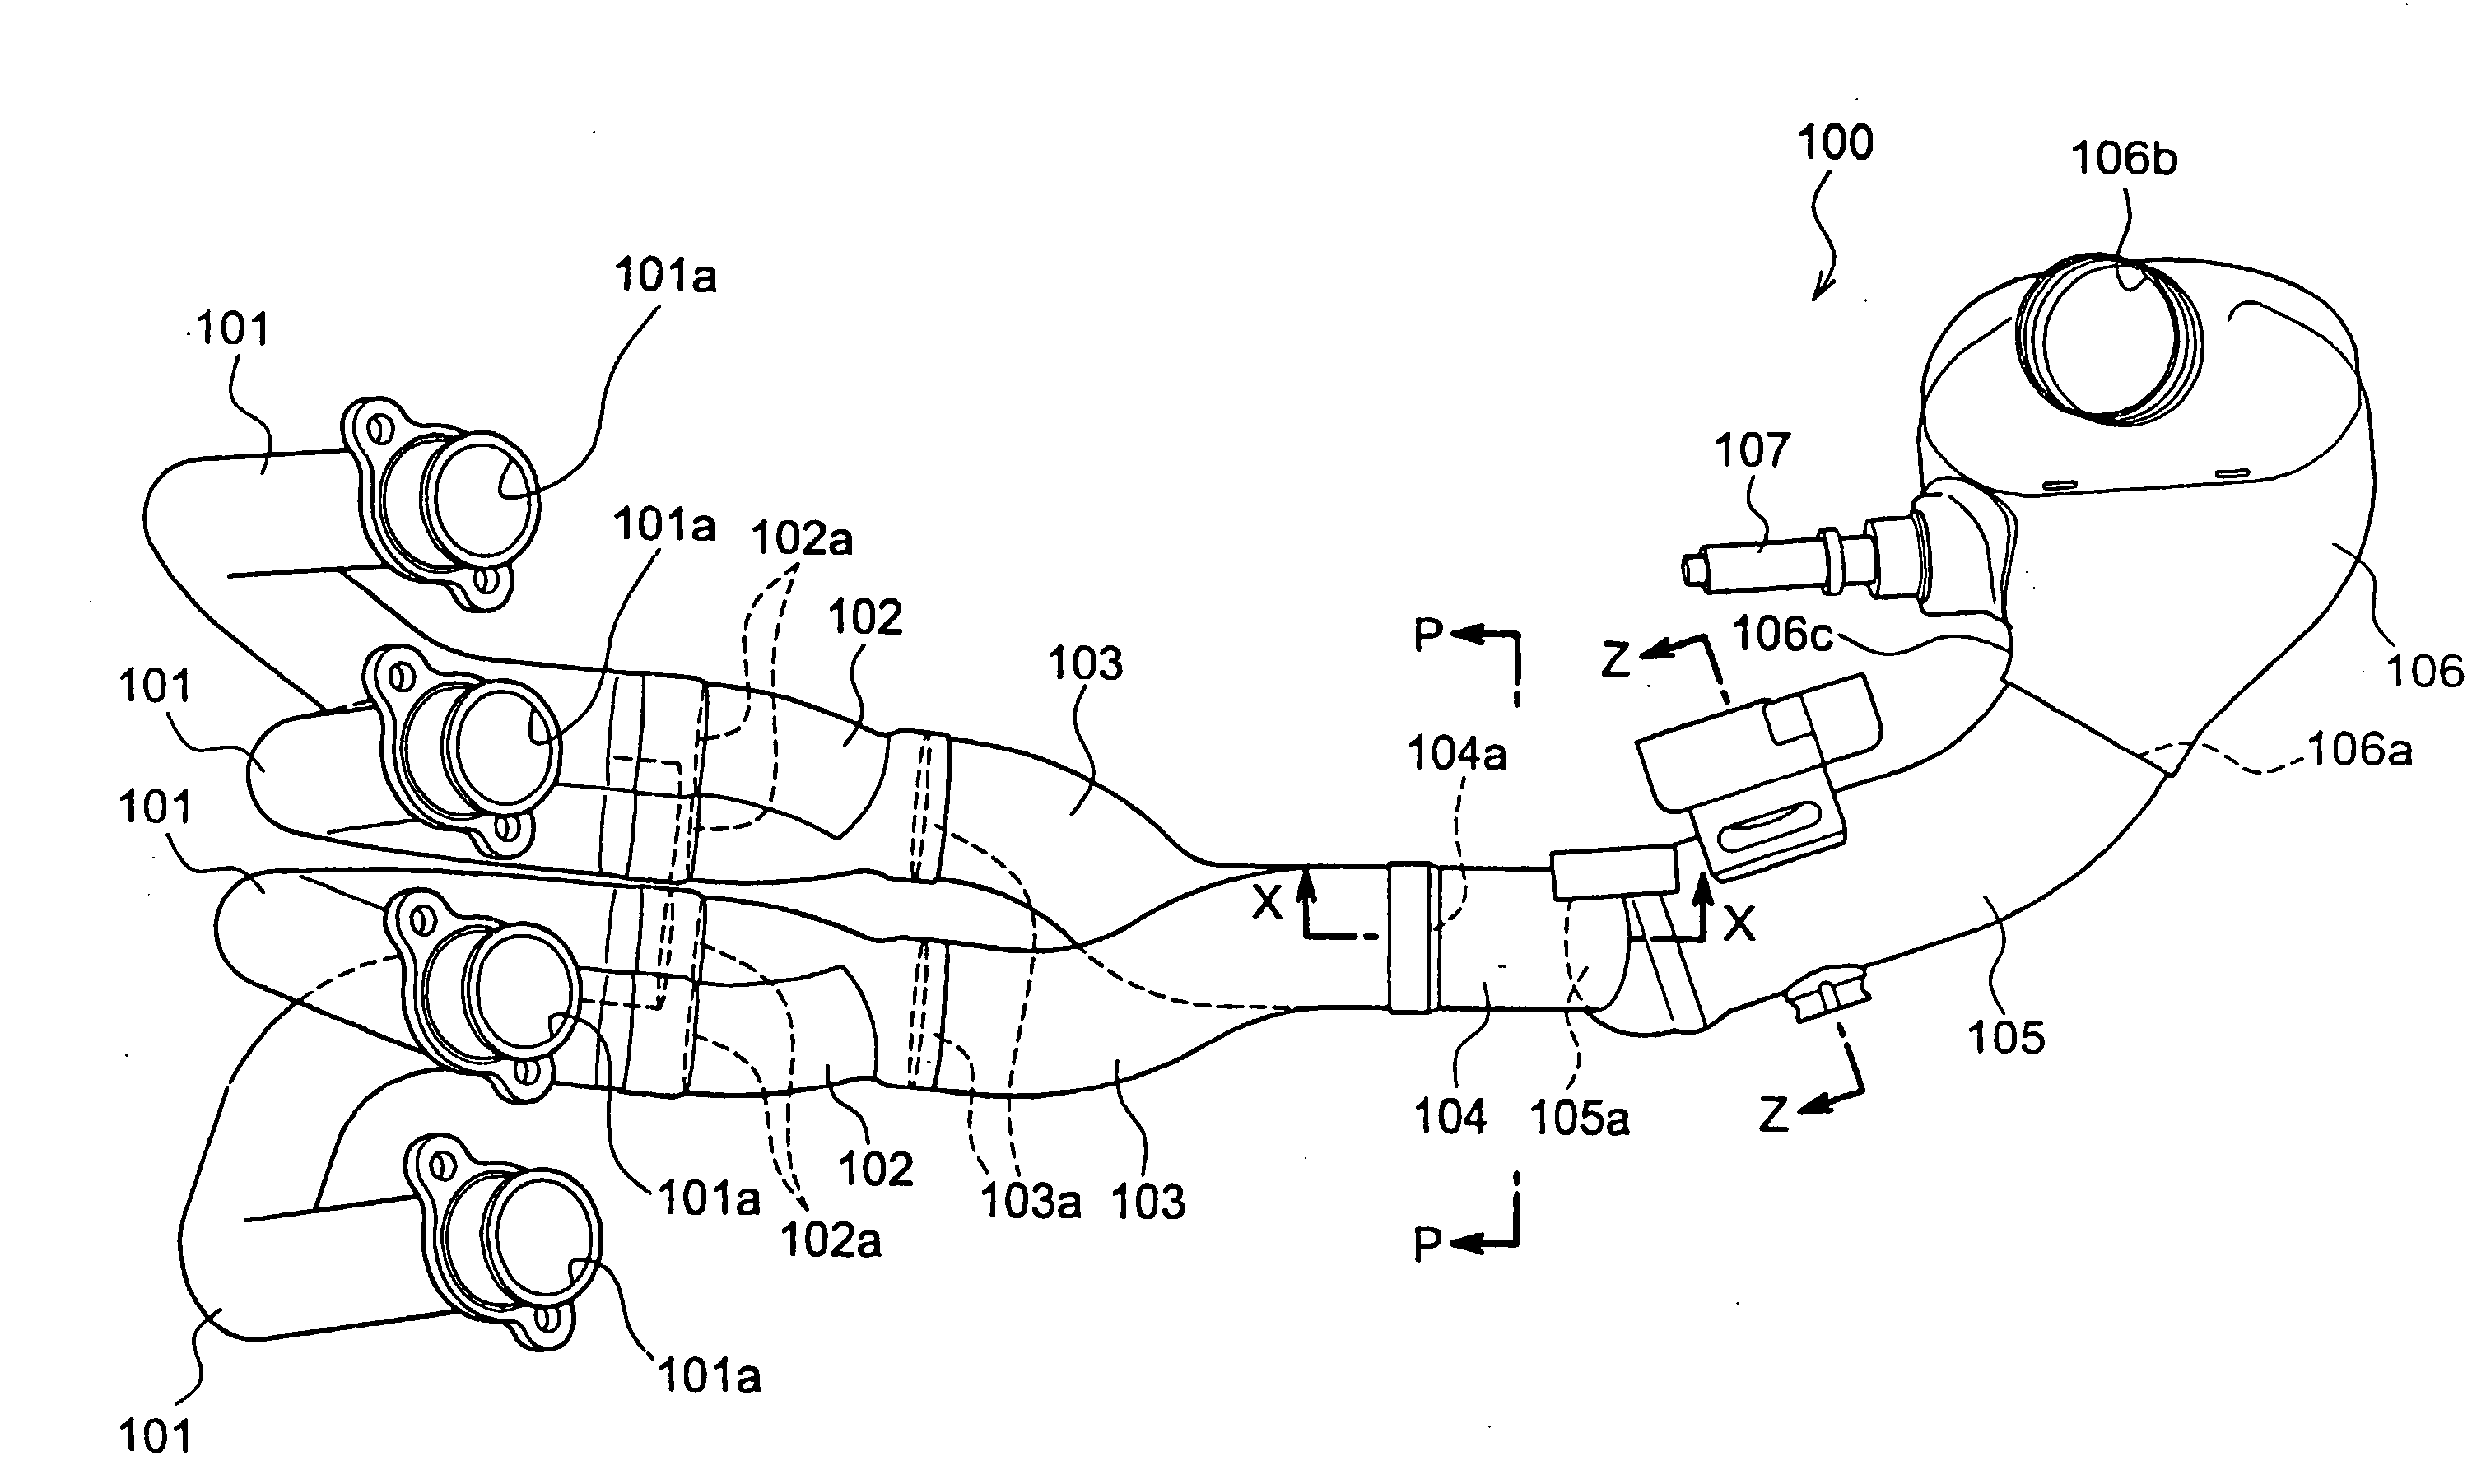 Exhaust device for motorcycle